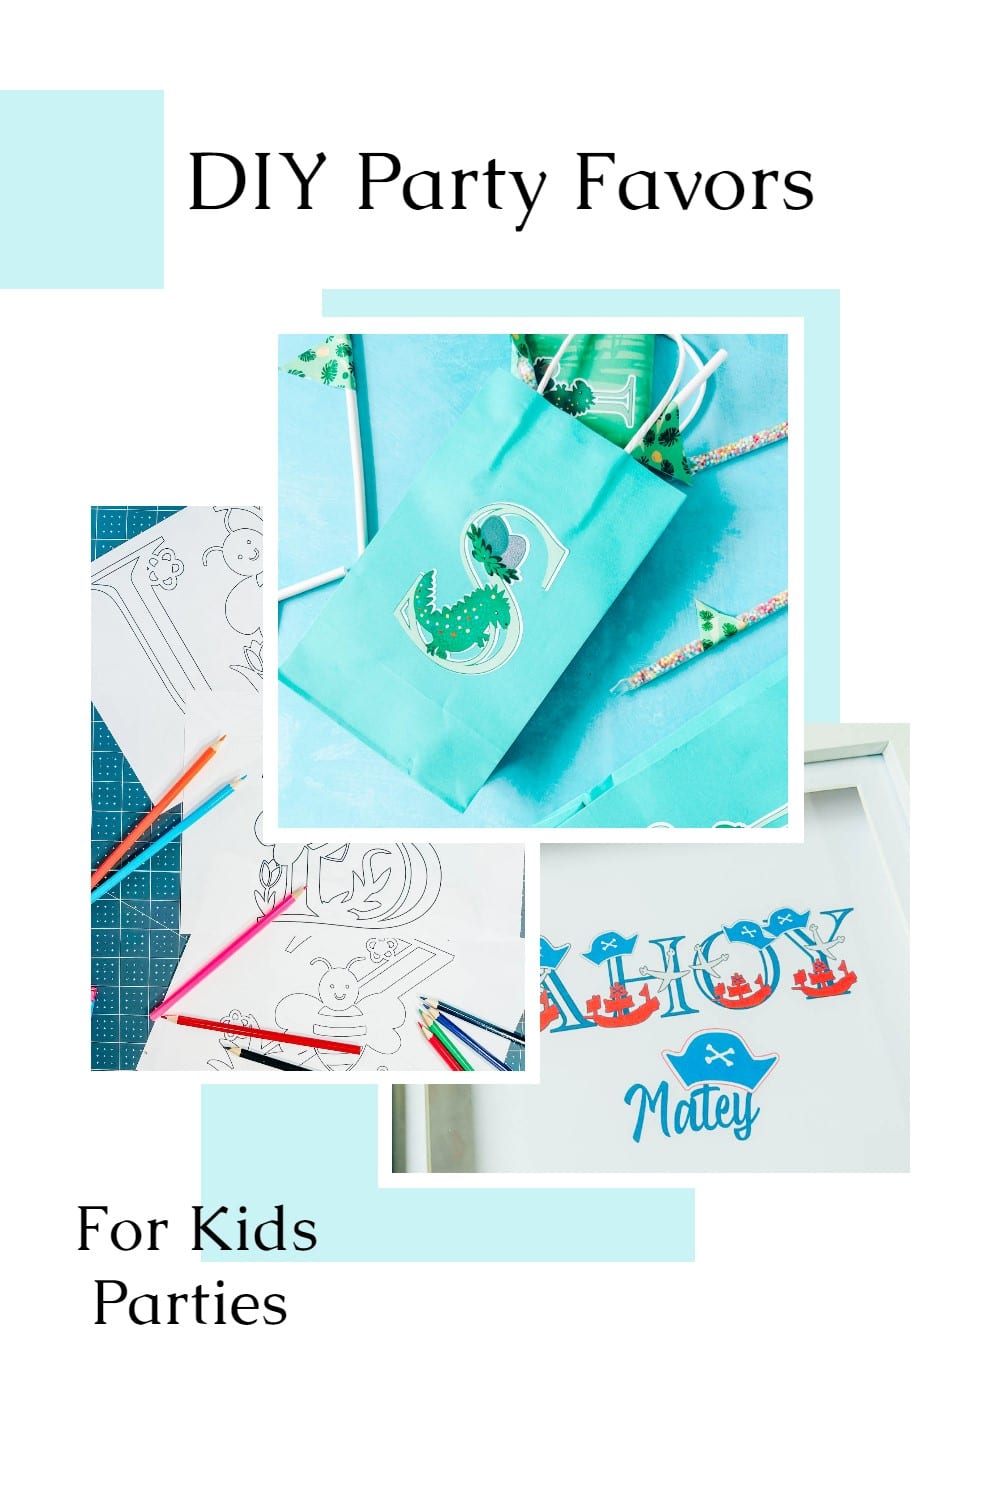 Kids parties are such an important part of growing up. These DIY party favors for kids will help you be the hit of the party. via @repurposedlife